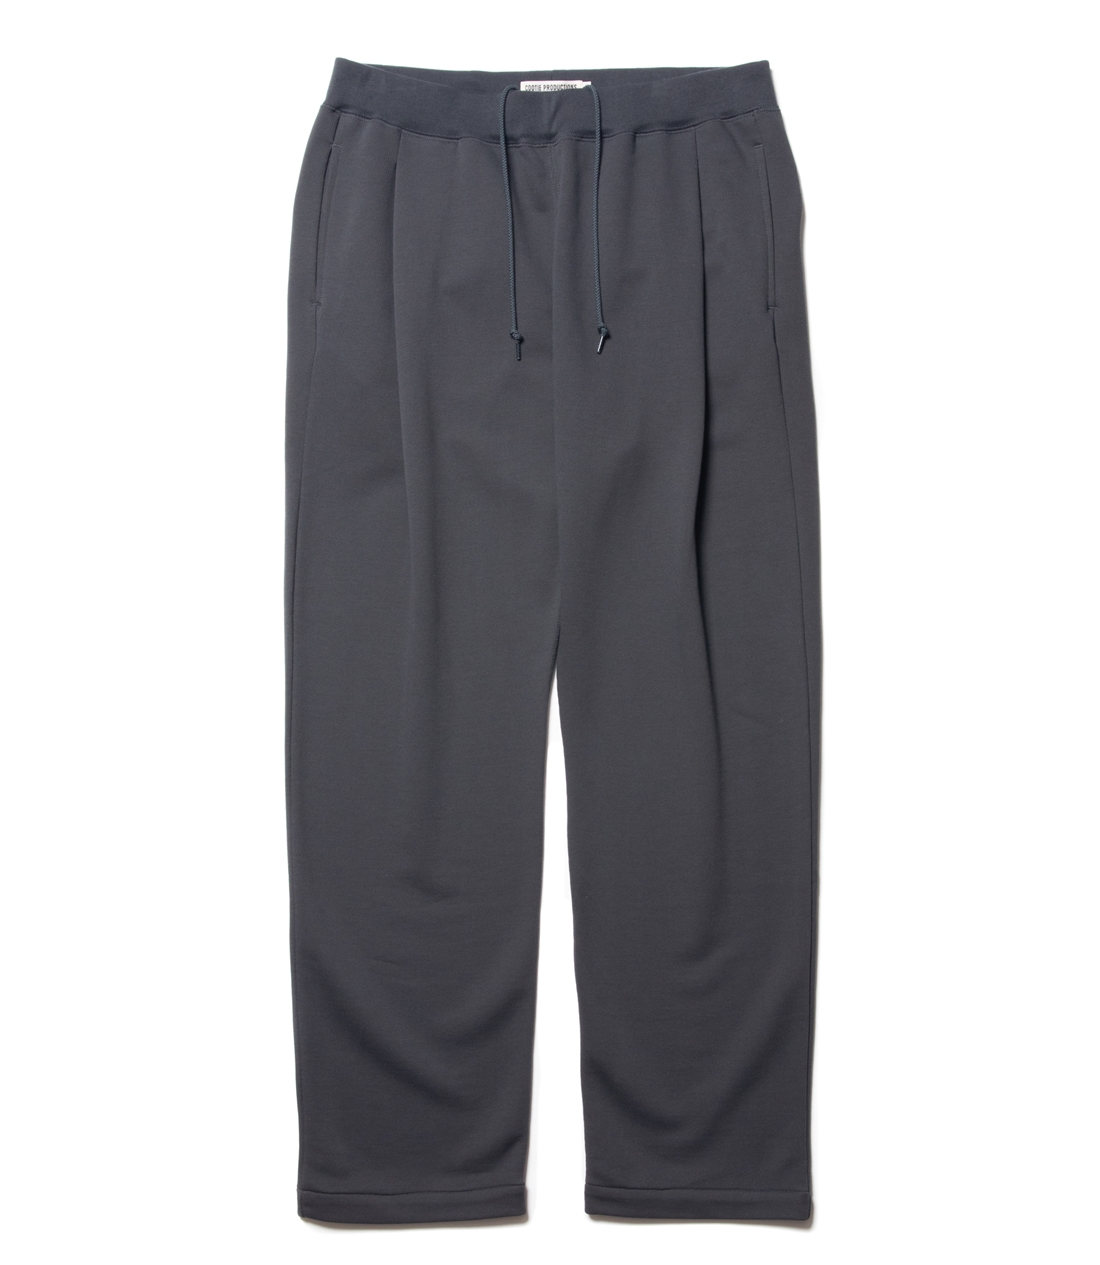 COOTIE PRODUCTIONS/Inlay Sweat 1 Tuck Easy Pants（Gray）[インレイスウェットワンタック